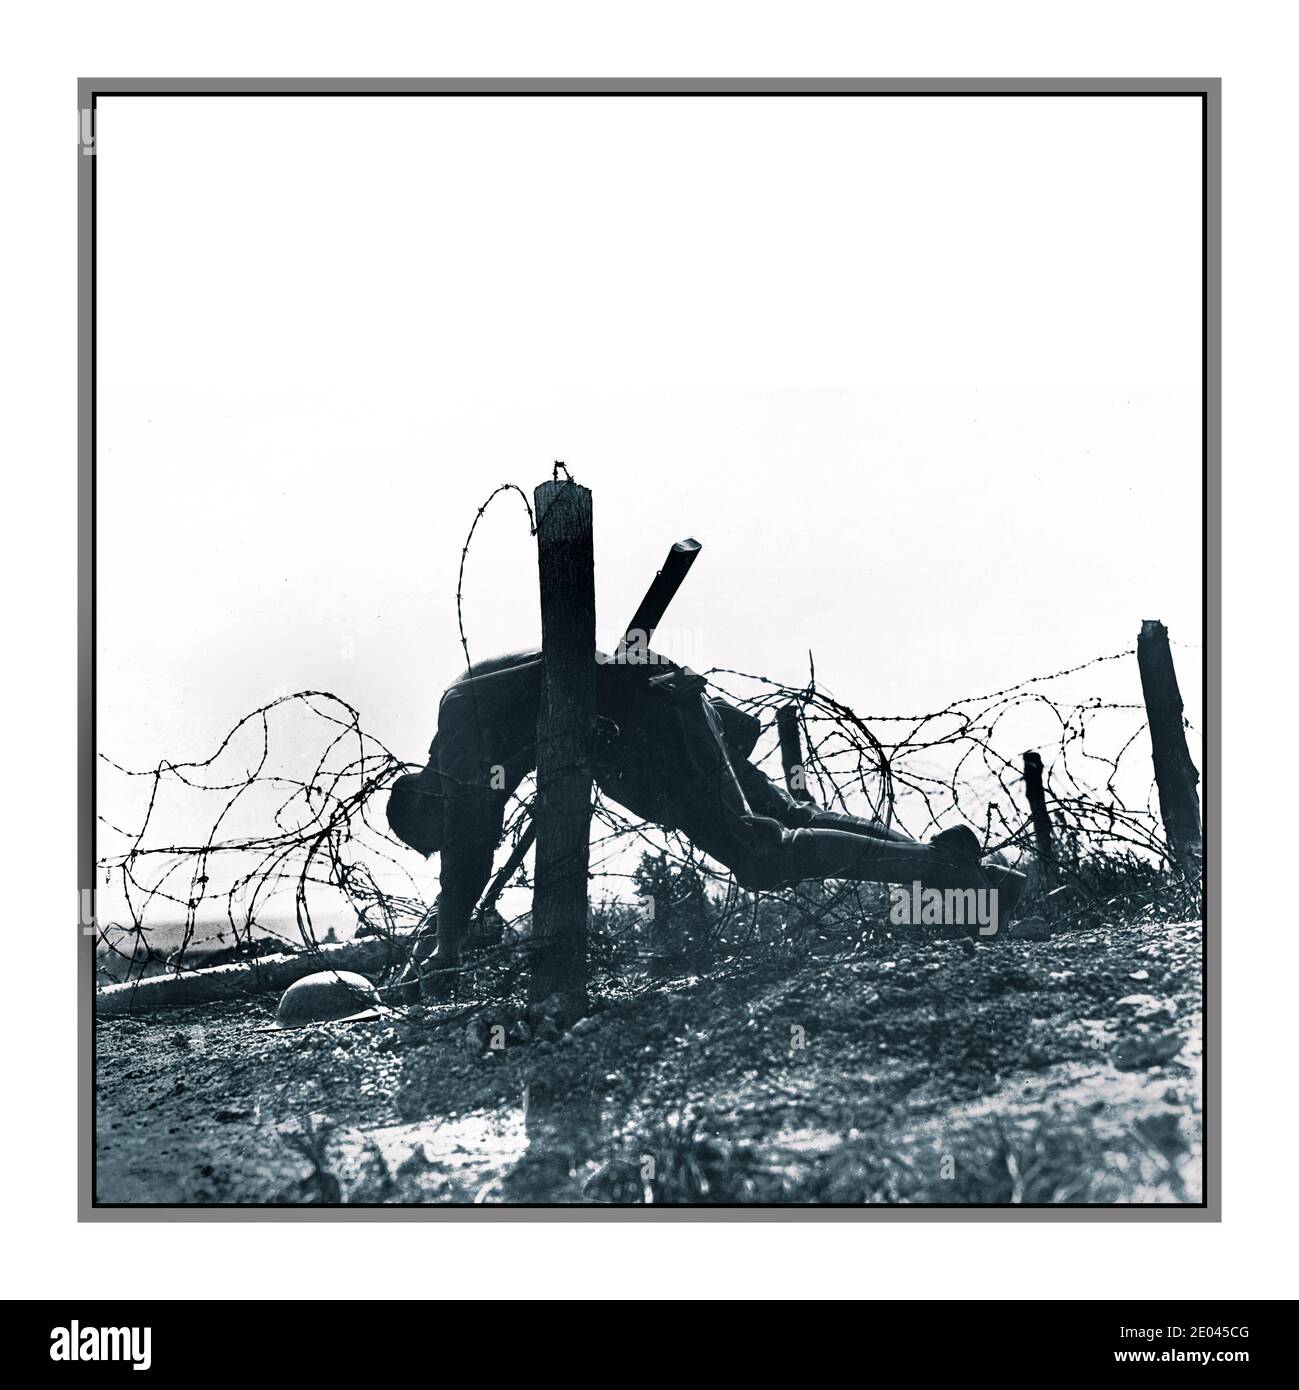 WW1 Soldier lies dead “In the wire” Stark Battlefield graphic poignant reminder of the horrors of war. American soldier caught on German barbed wire fence Western Front France. The Meuse–Argonne offensive (also known as the Meuse River–Argonne Forest offensive, the Battles of the Meuse–Argonne, and the Meuse–Argonne campaign) was a major part of the final Allied offensive of World War I that stretched along the entire Western Front .Powell, Eyre, 1891-1949, photographer 1918 -  World War, 1914-1918--Casualties--American--France -  Soldiers--American--France--1910-1920 alt version 2E045CX Stock Photo